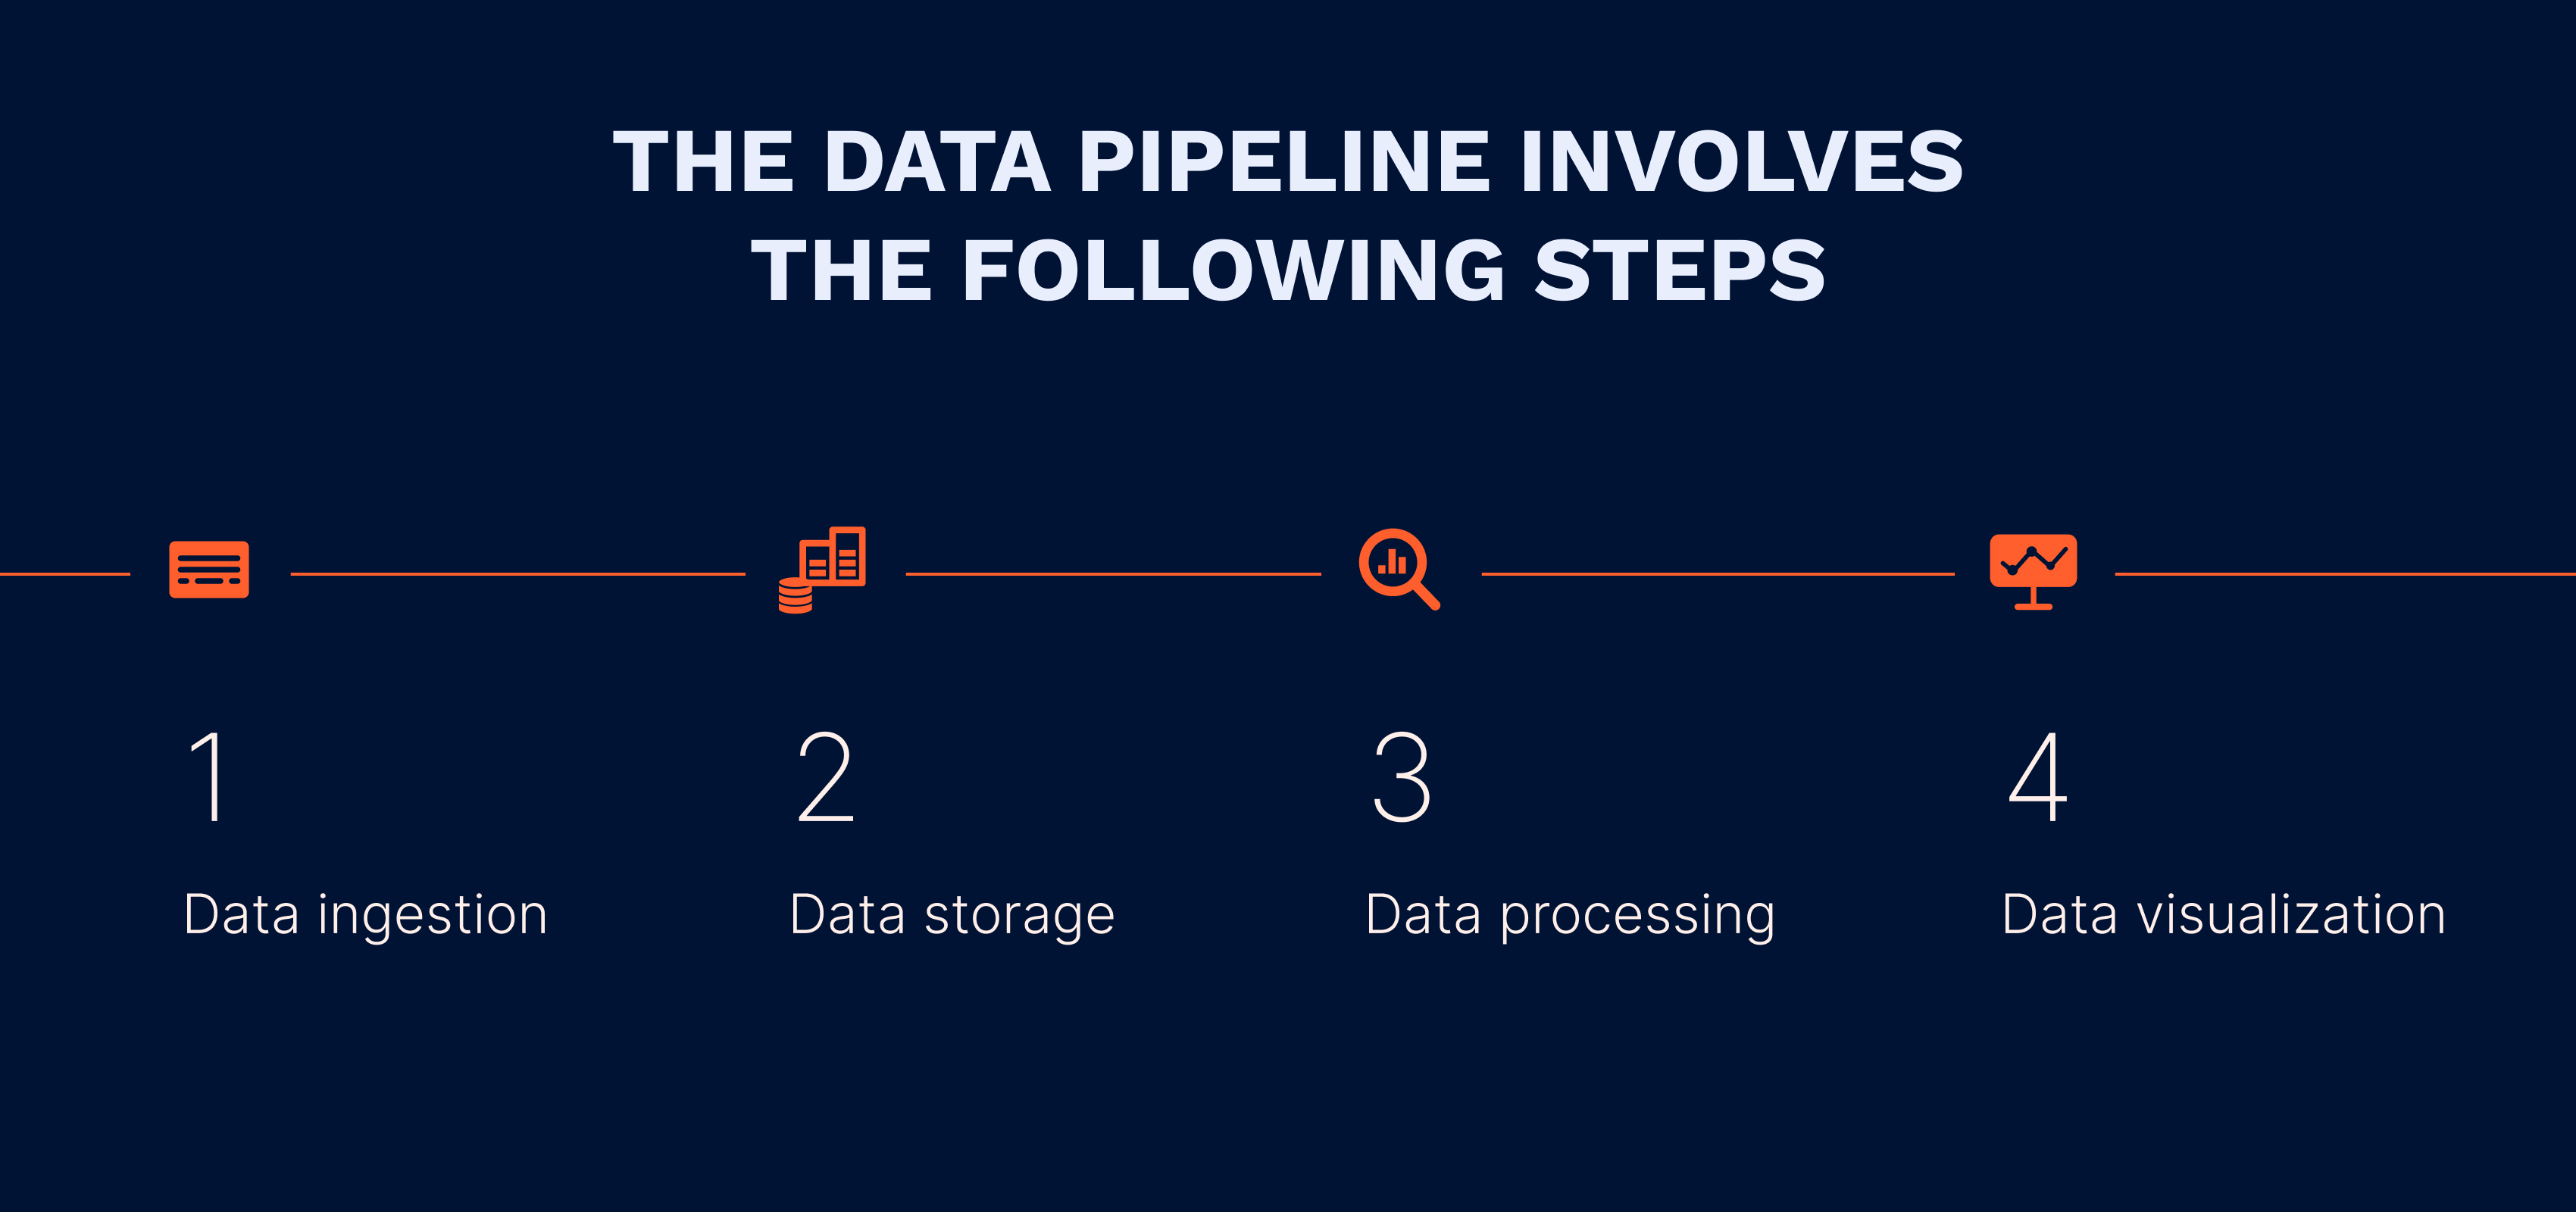 Data Pipelines in the Healthcare Industry